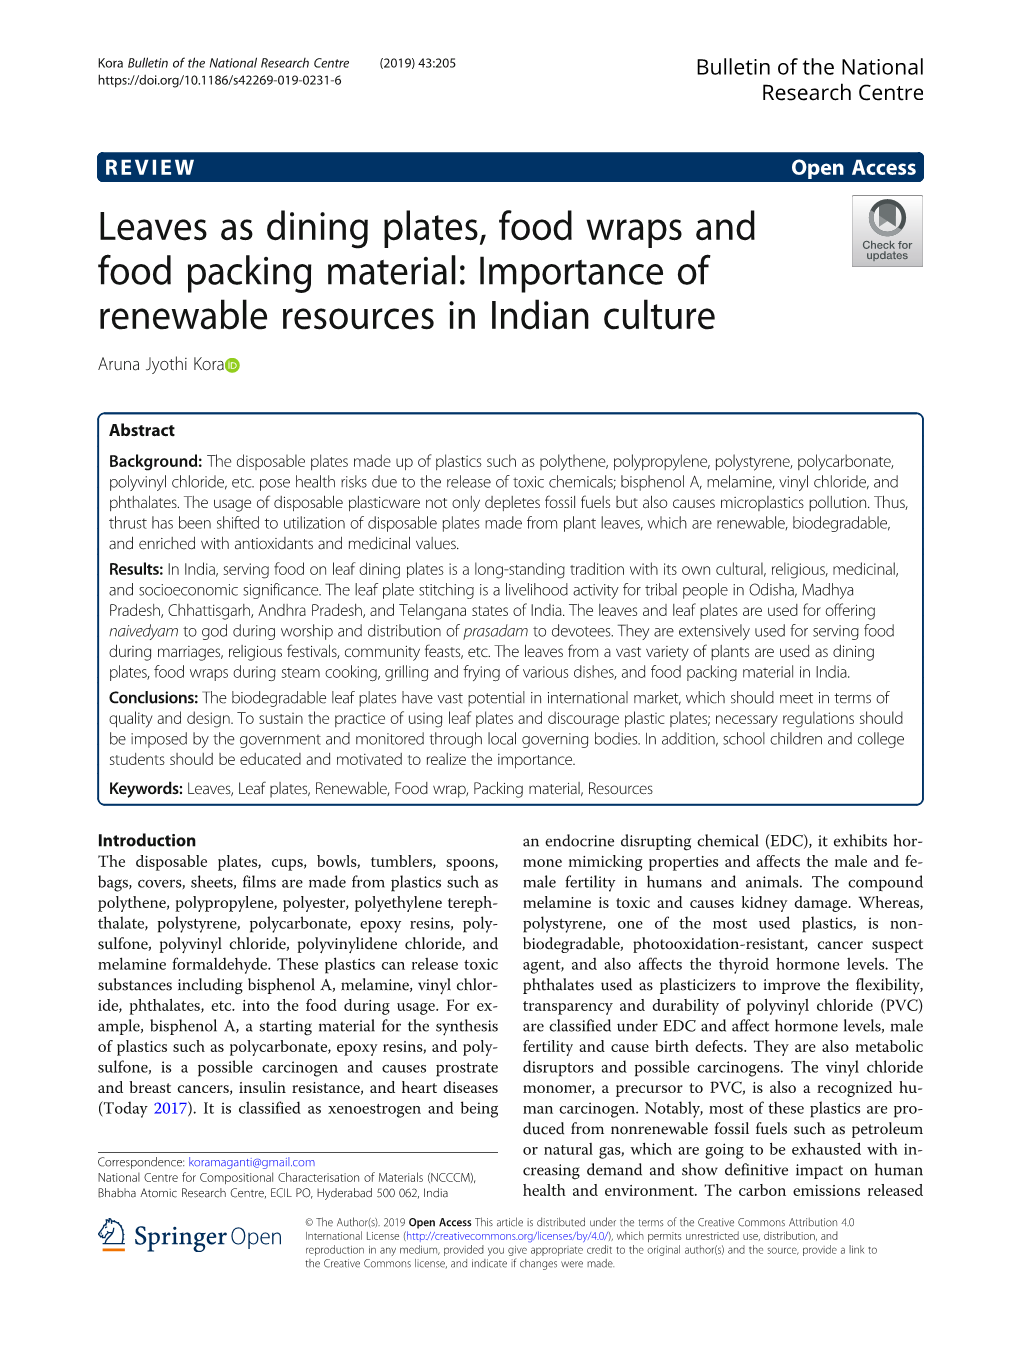 Leaves As Dining Plates, Food Wraps and Food Packing Material: Importance of Renewable Resources in Indian Culture Aruna Jyothi Kora